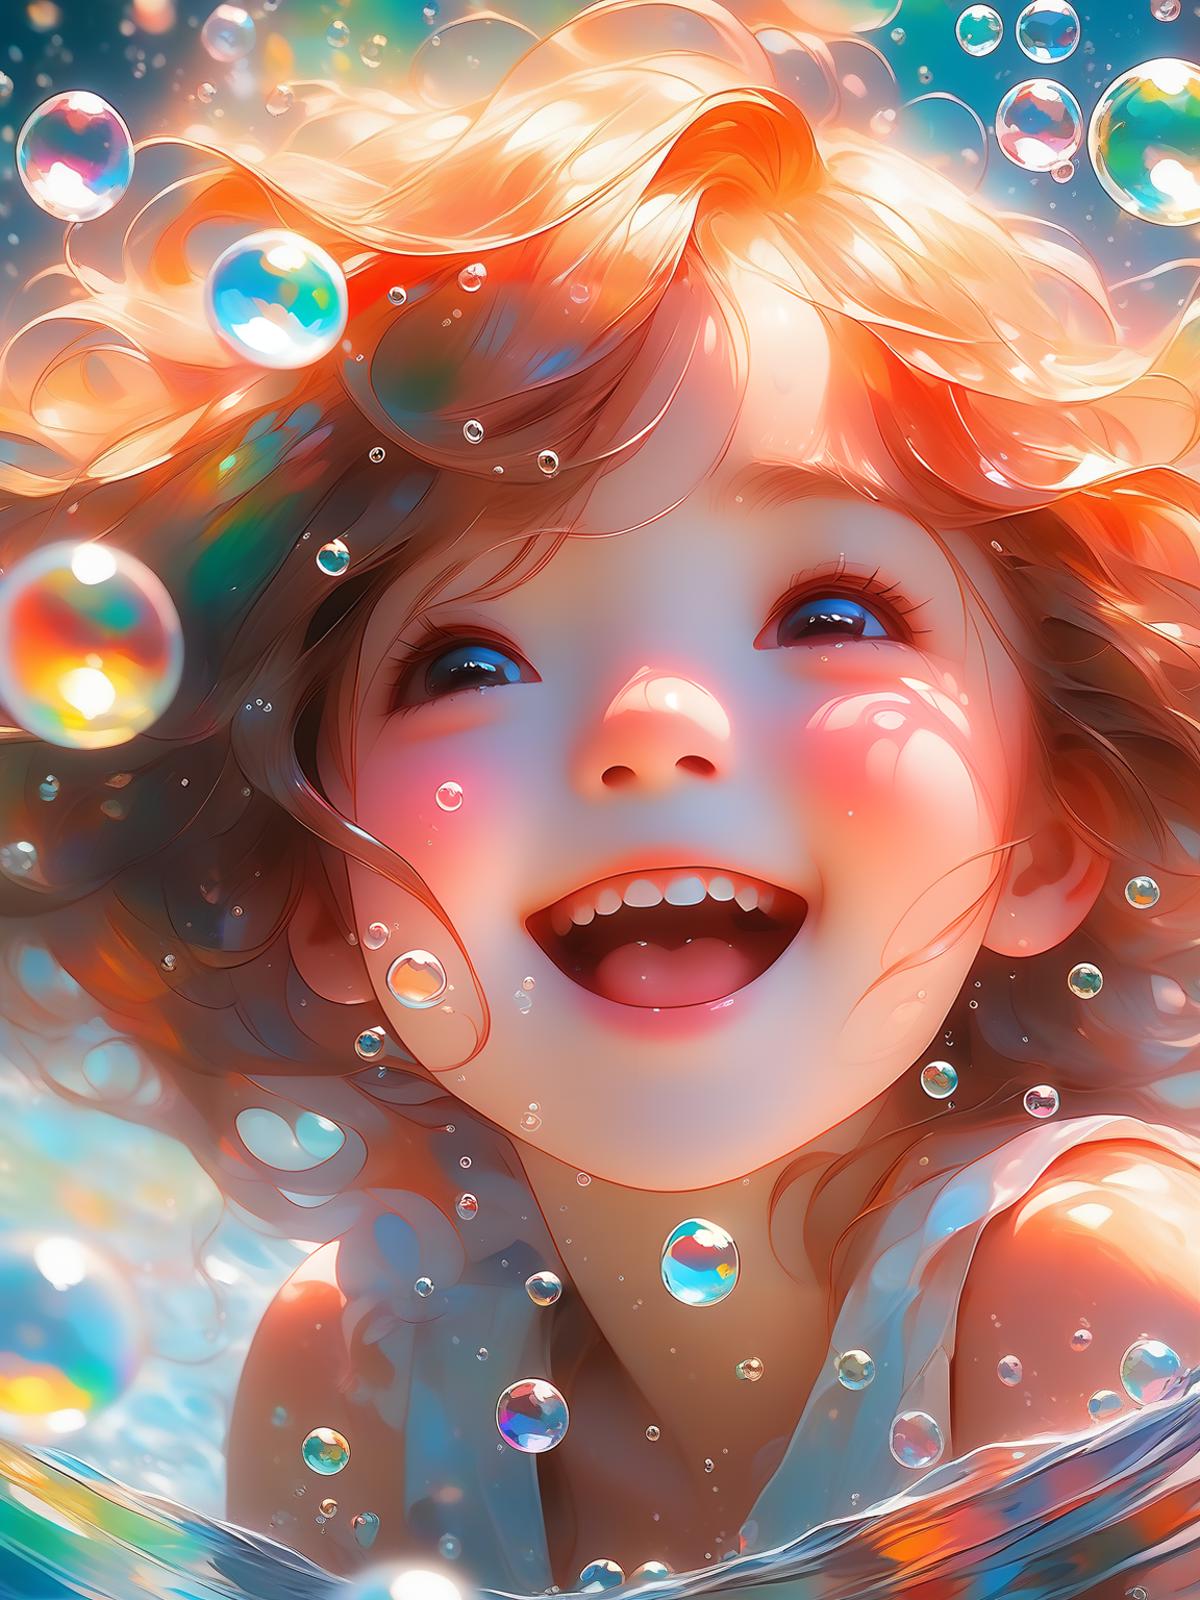 A smiling girl in a drawing with bubbles around her and a flower in her hair.